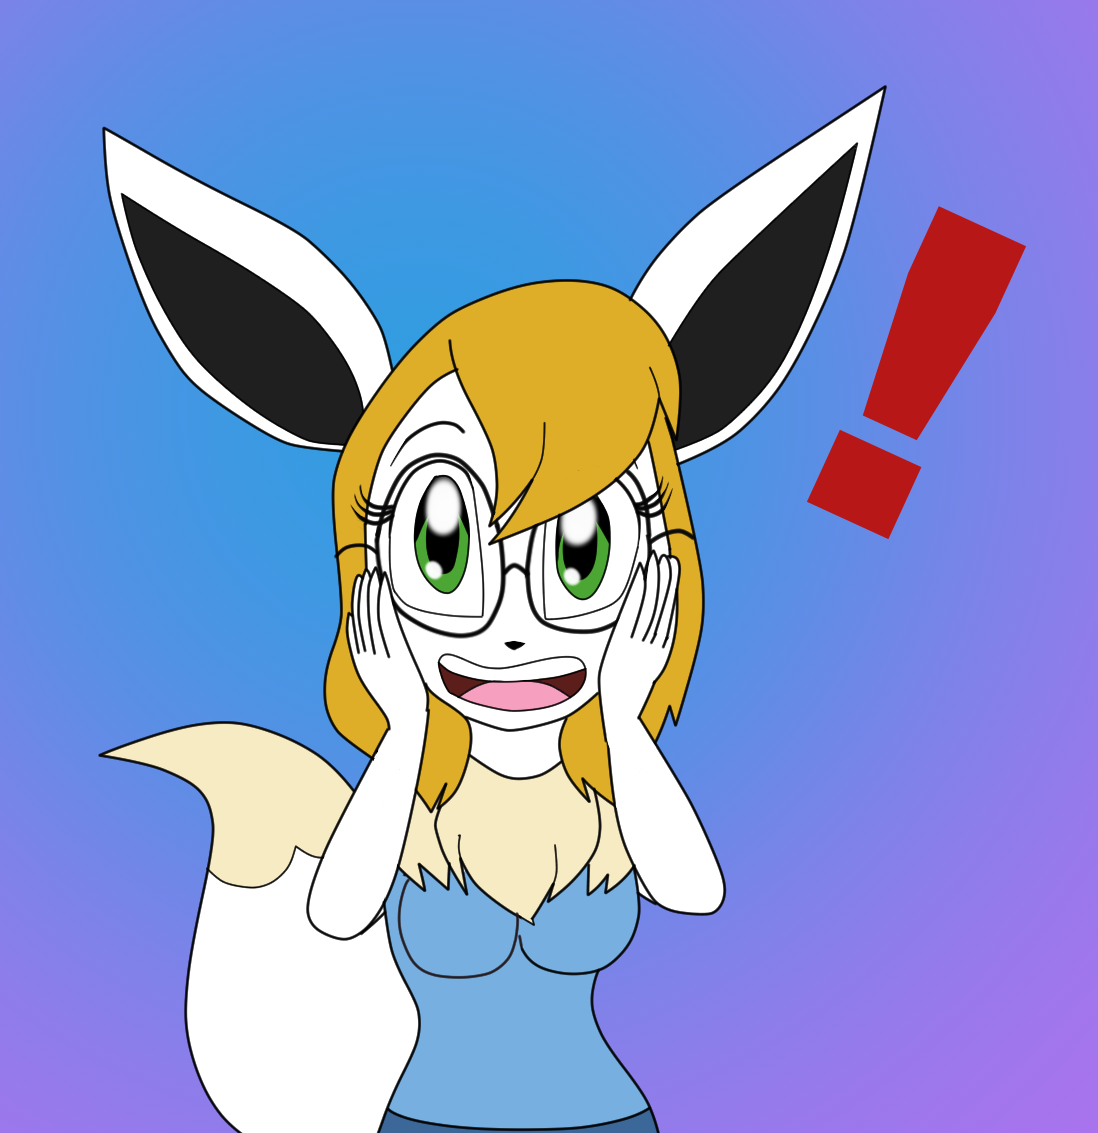 Kendra the Shiny Eevee - Been a while since I made some rule 63